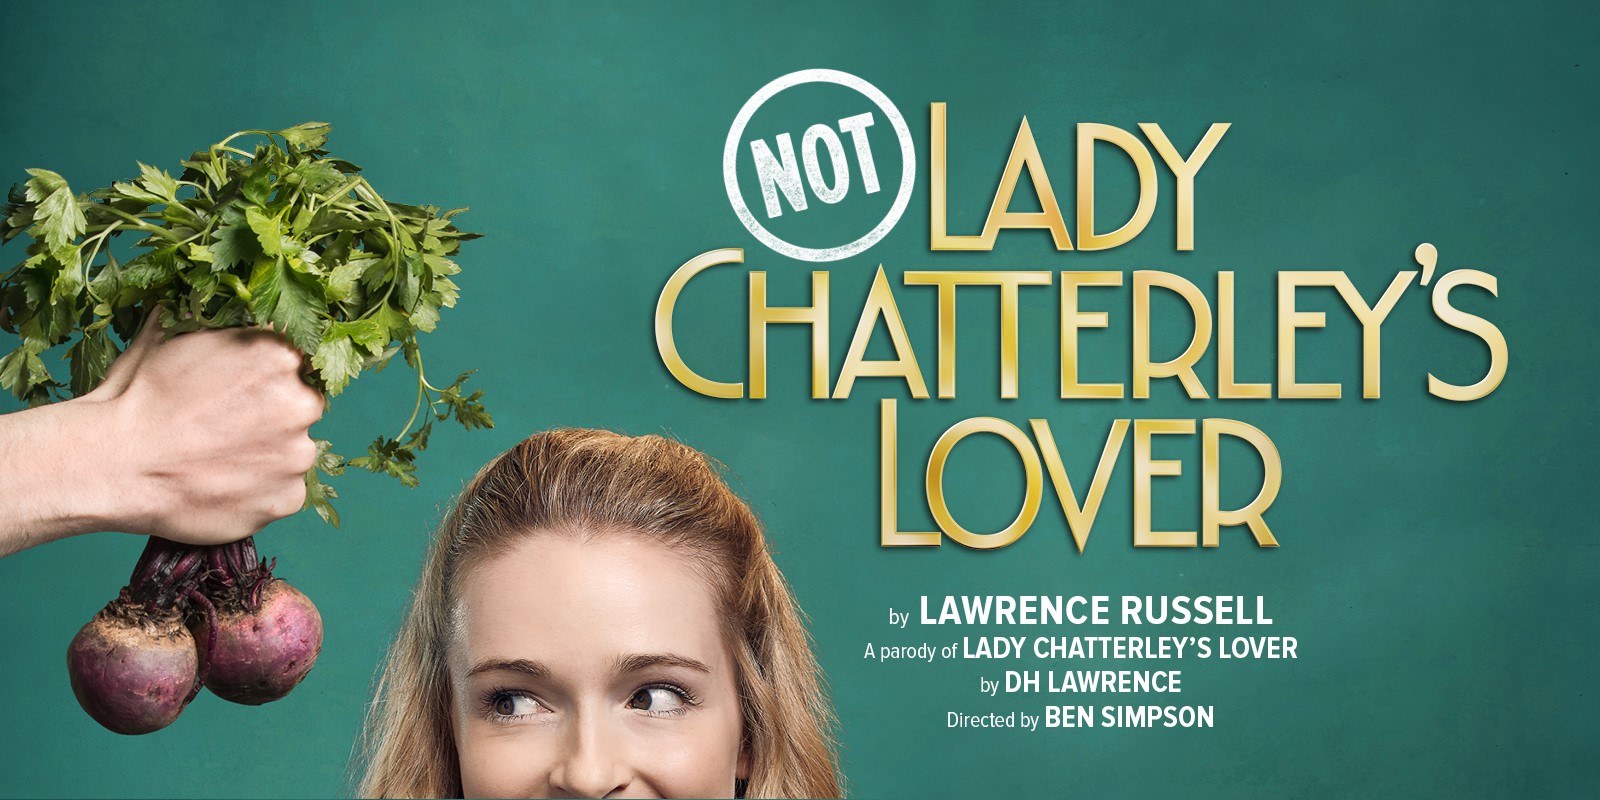 Not Lady Chatterley's Lover with director name